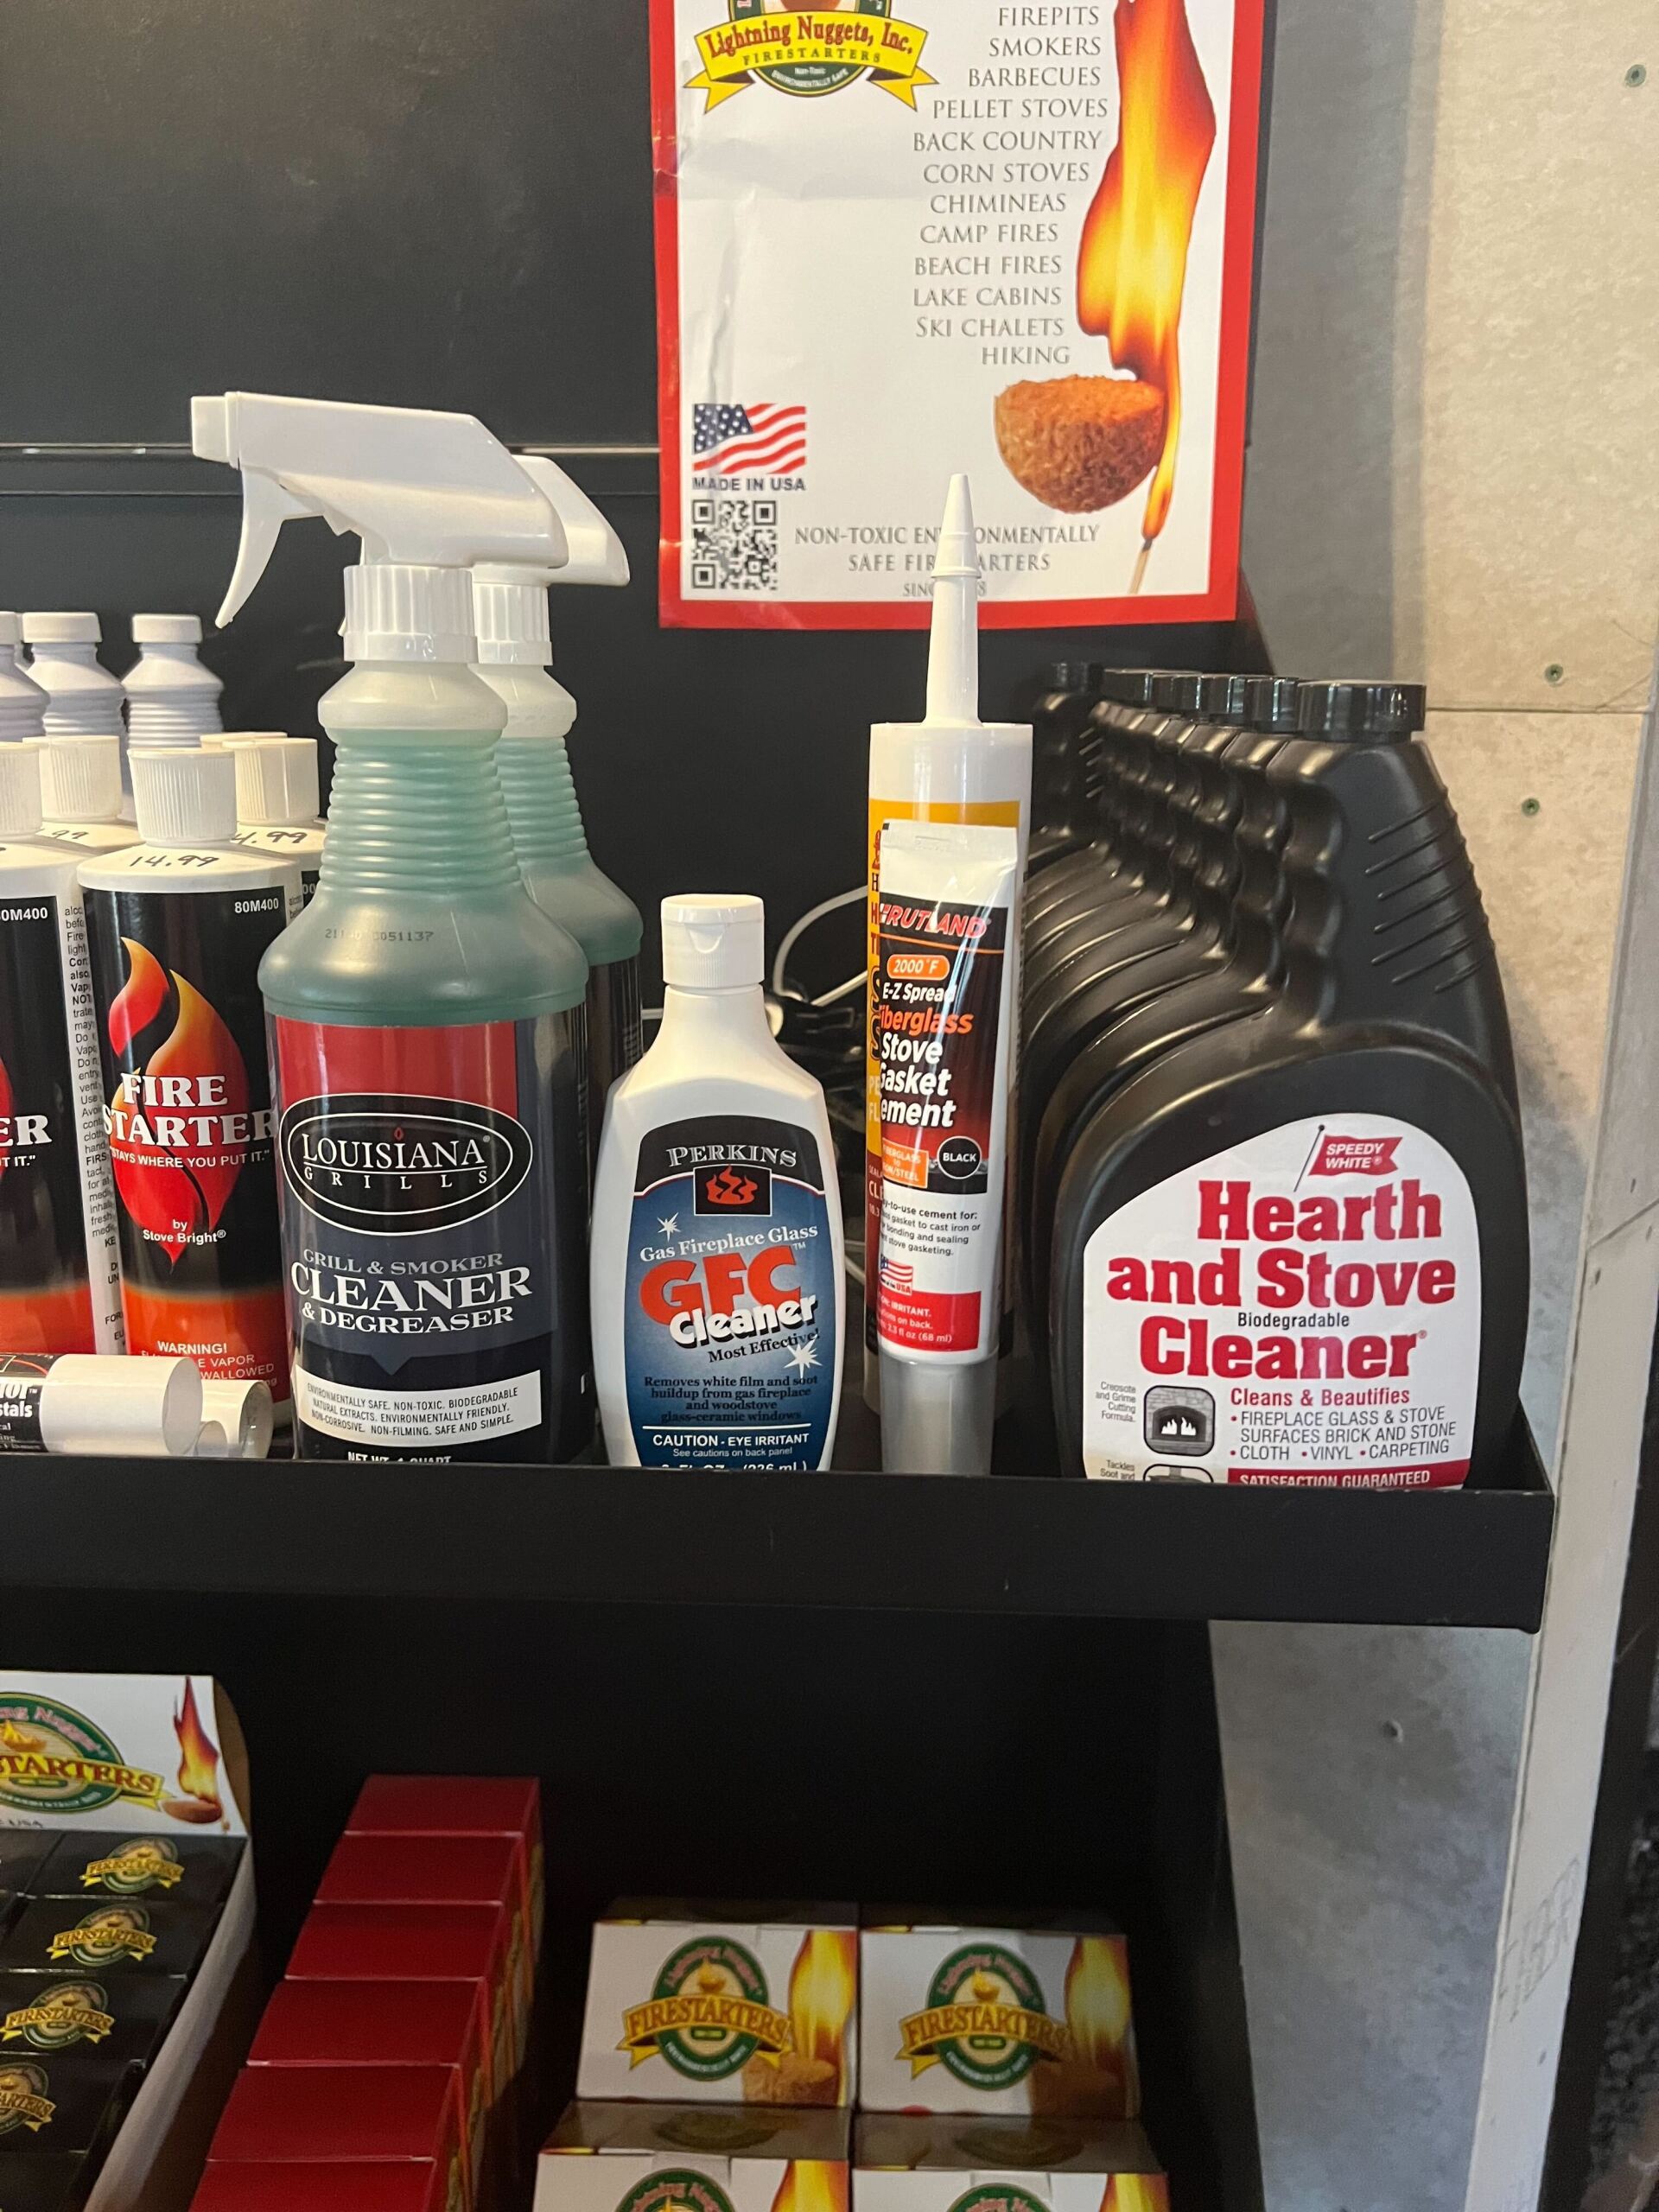 Hearth and stove cleaner